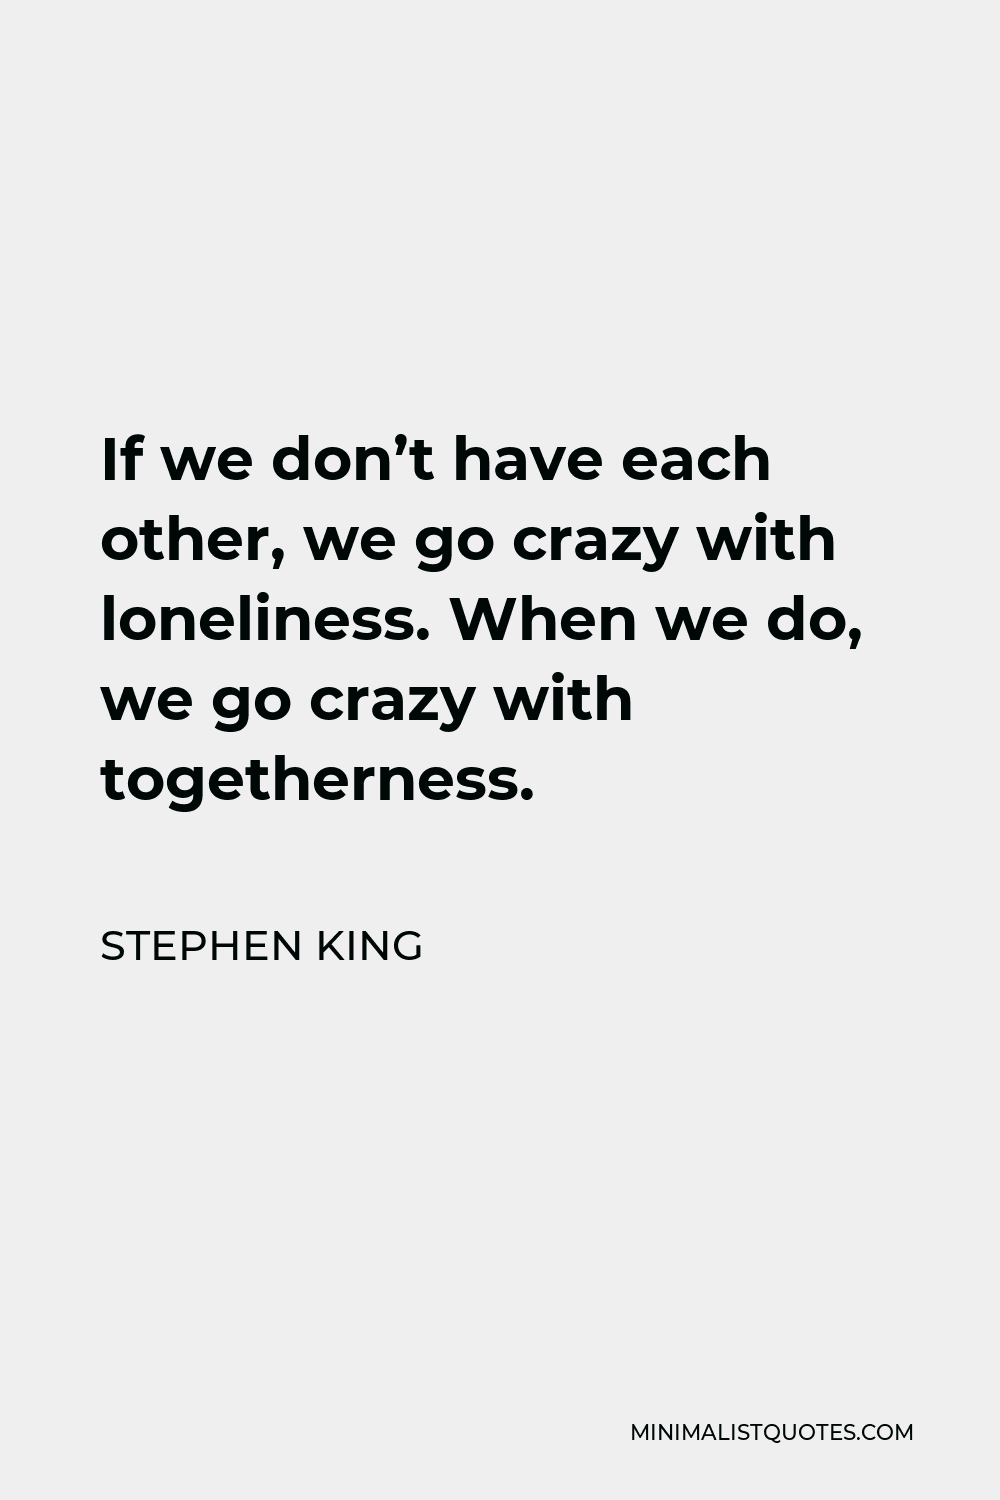 Stephen King Quote - If we don’t have each other, we go crazy with loneliness. When we do, we go crazy with togetherness.